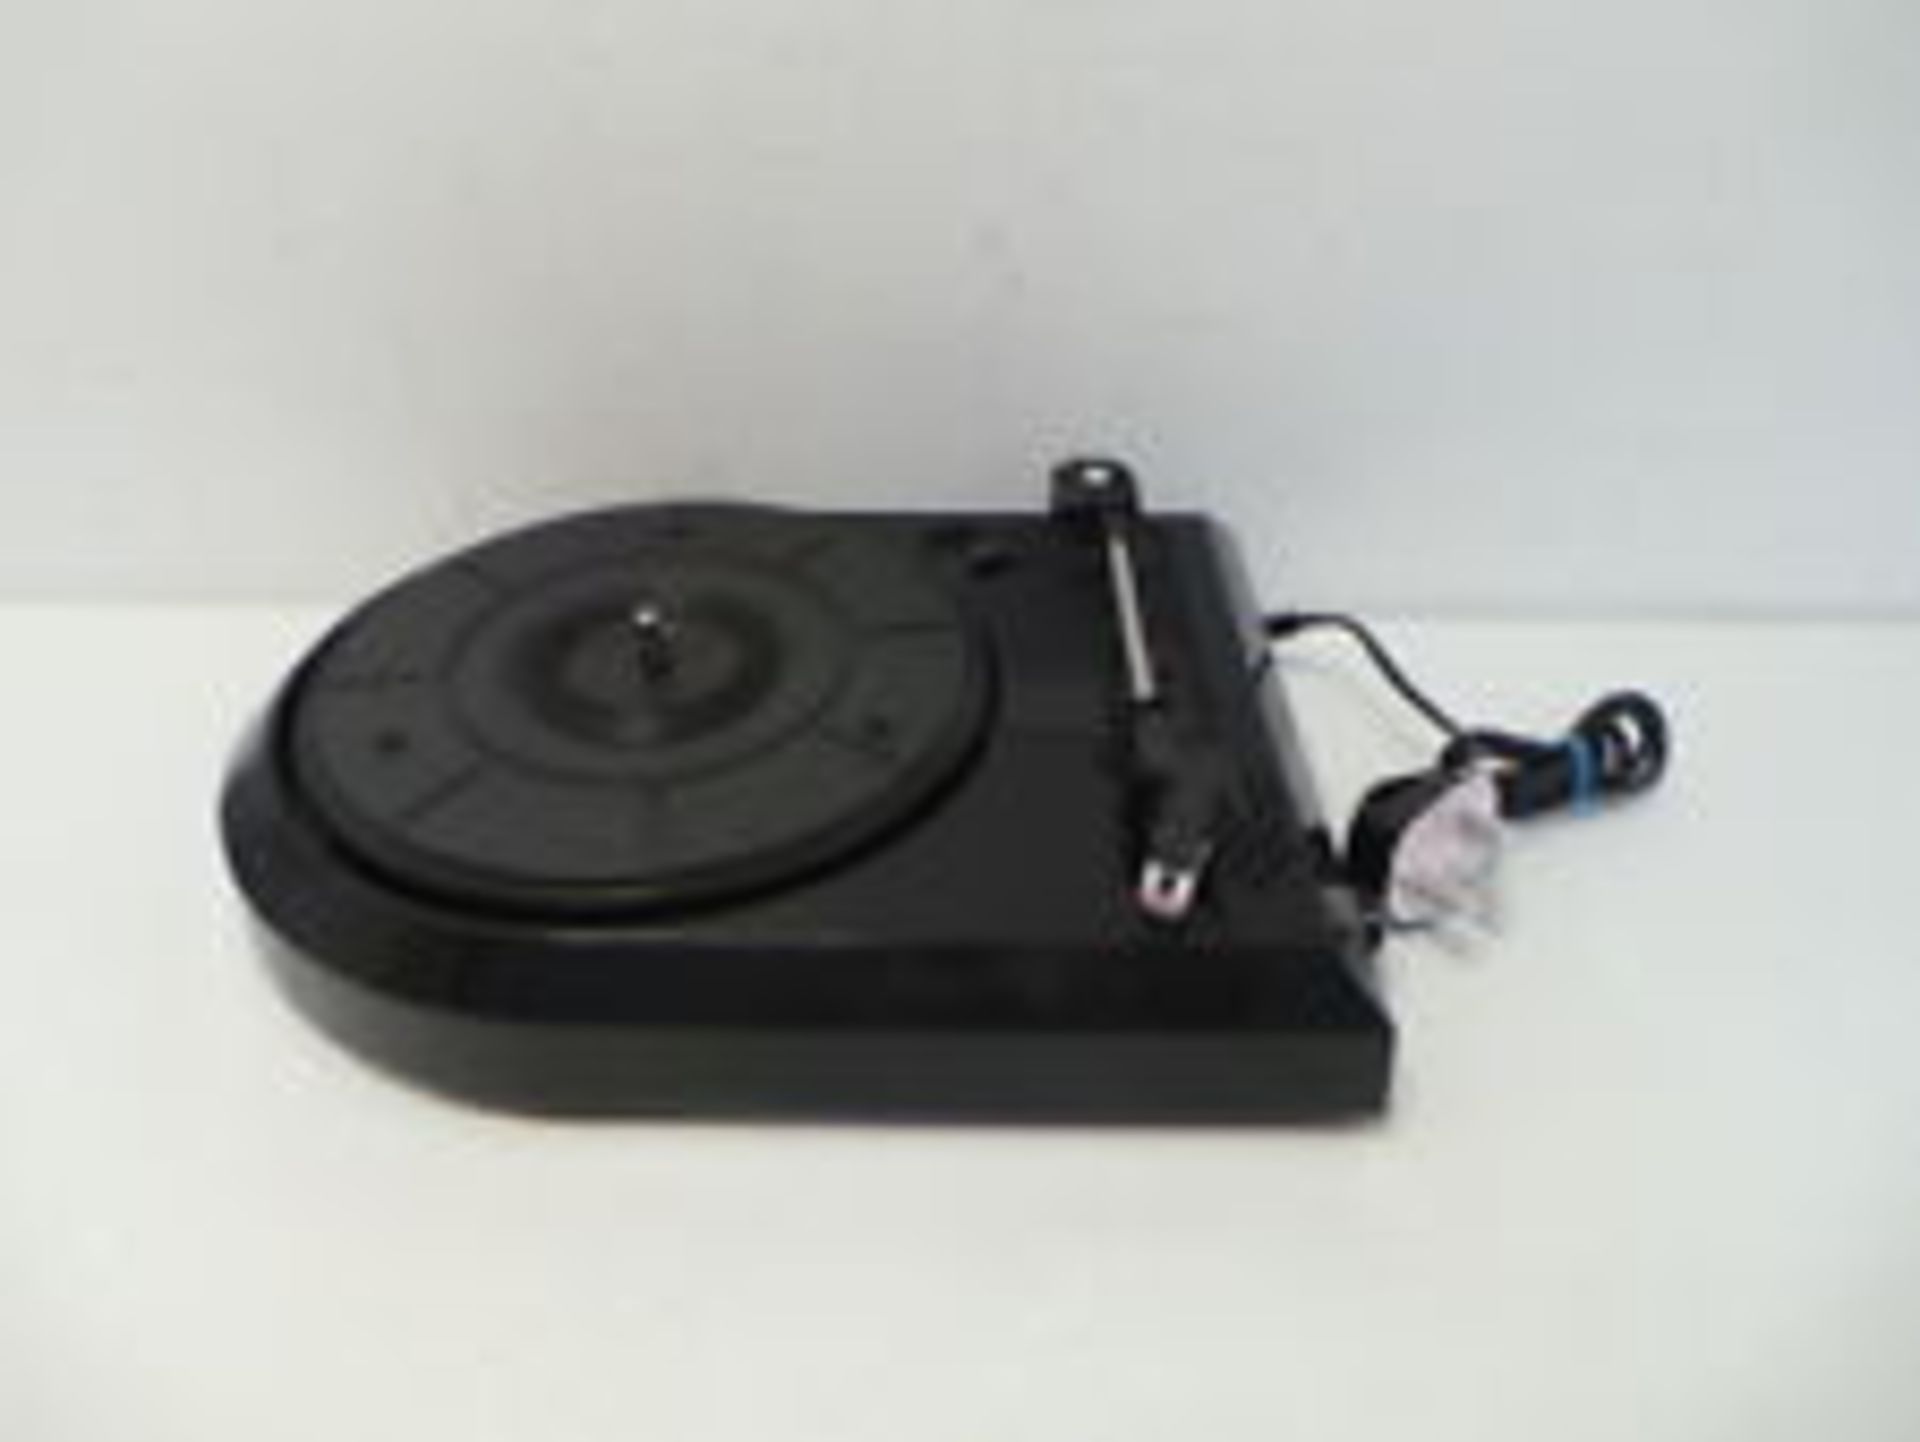 V *TRADE QTY* Brand New Zennox USB Turntable With Built In Speaker With Volume Control Convert LP - Image 2 of 2